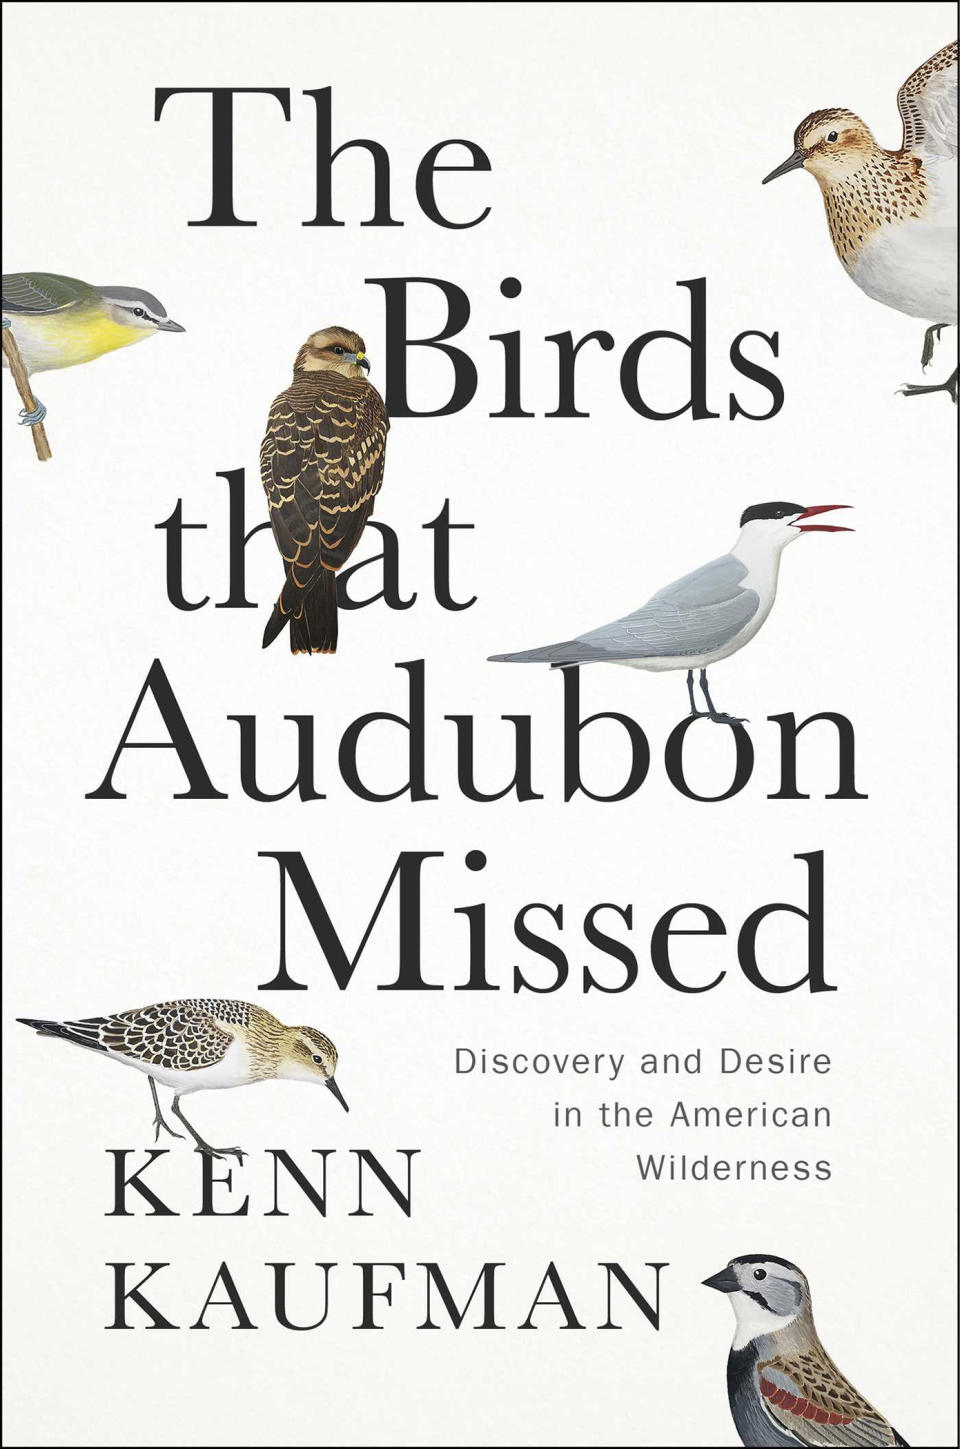 This cover image released by Avid Reader Press shows "The Birds that Audubon Missed: Discovery and Desire in the American Wilderness" by Kenn Kaufman. (Avid Reader via AP)